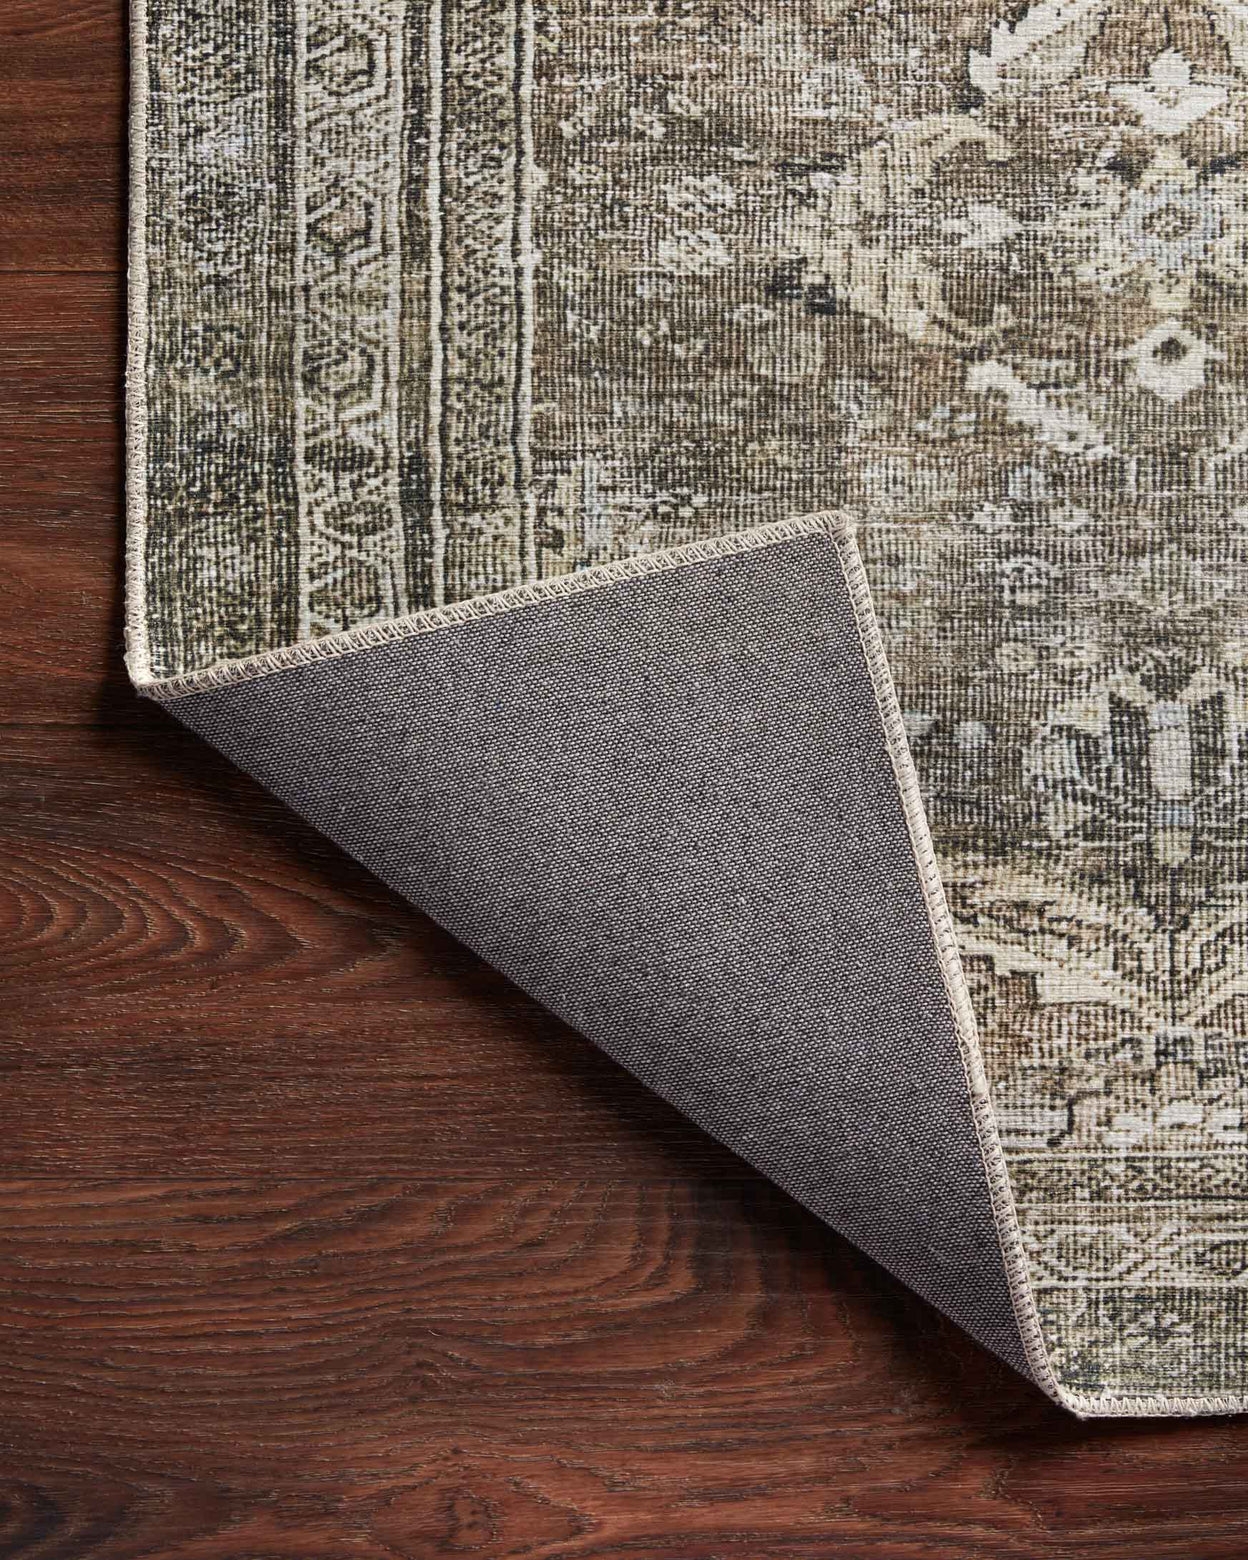 Layla Collection rug - LAY-13 Antique / Moss - Image 8